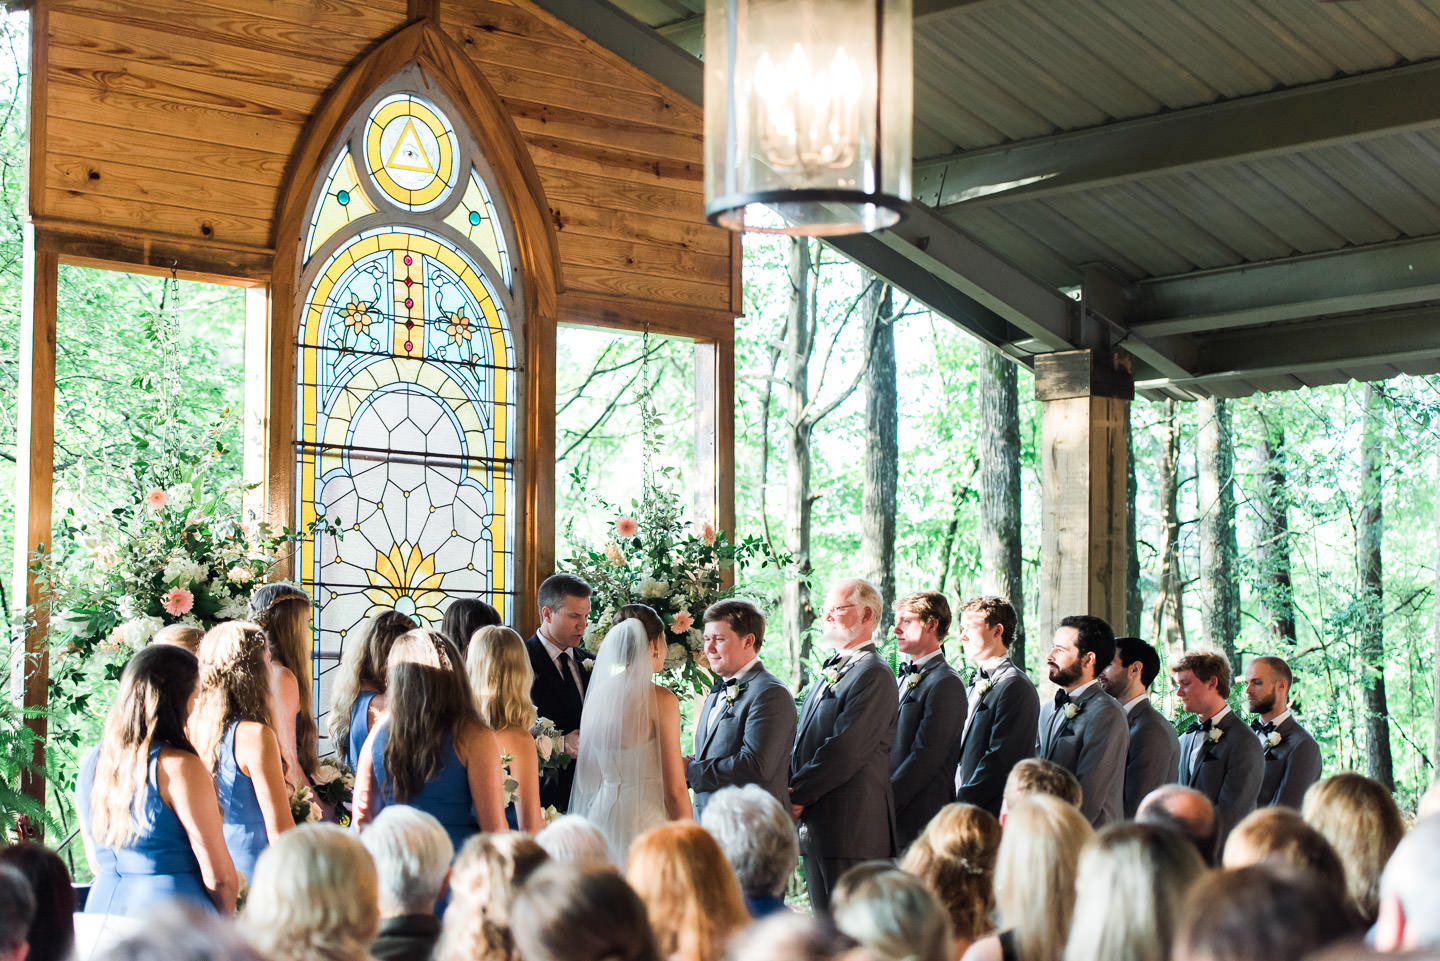 Southern Bride and Groom exchange vows in Rosegate Chapel, Mississippi wedding venue